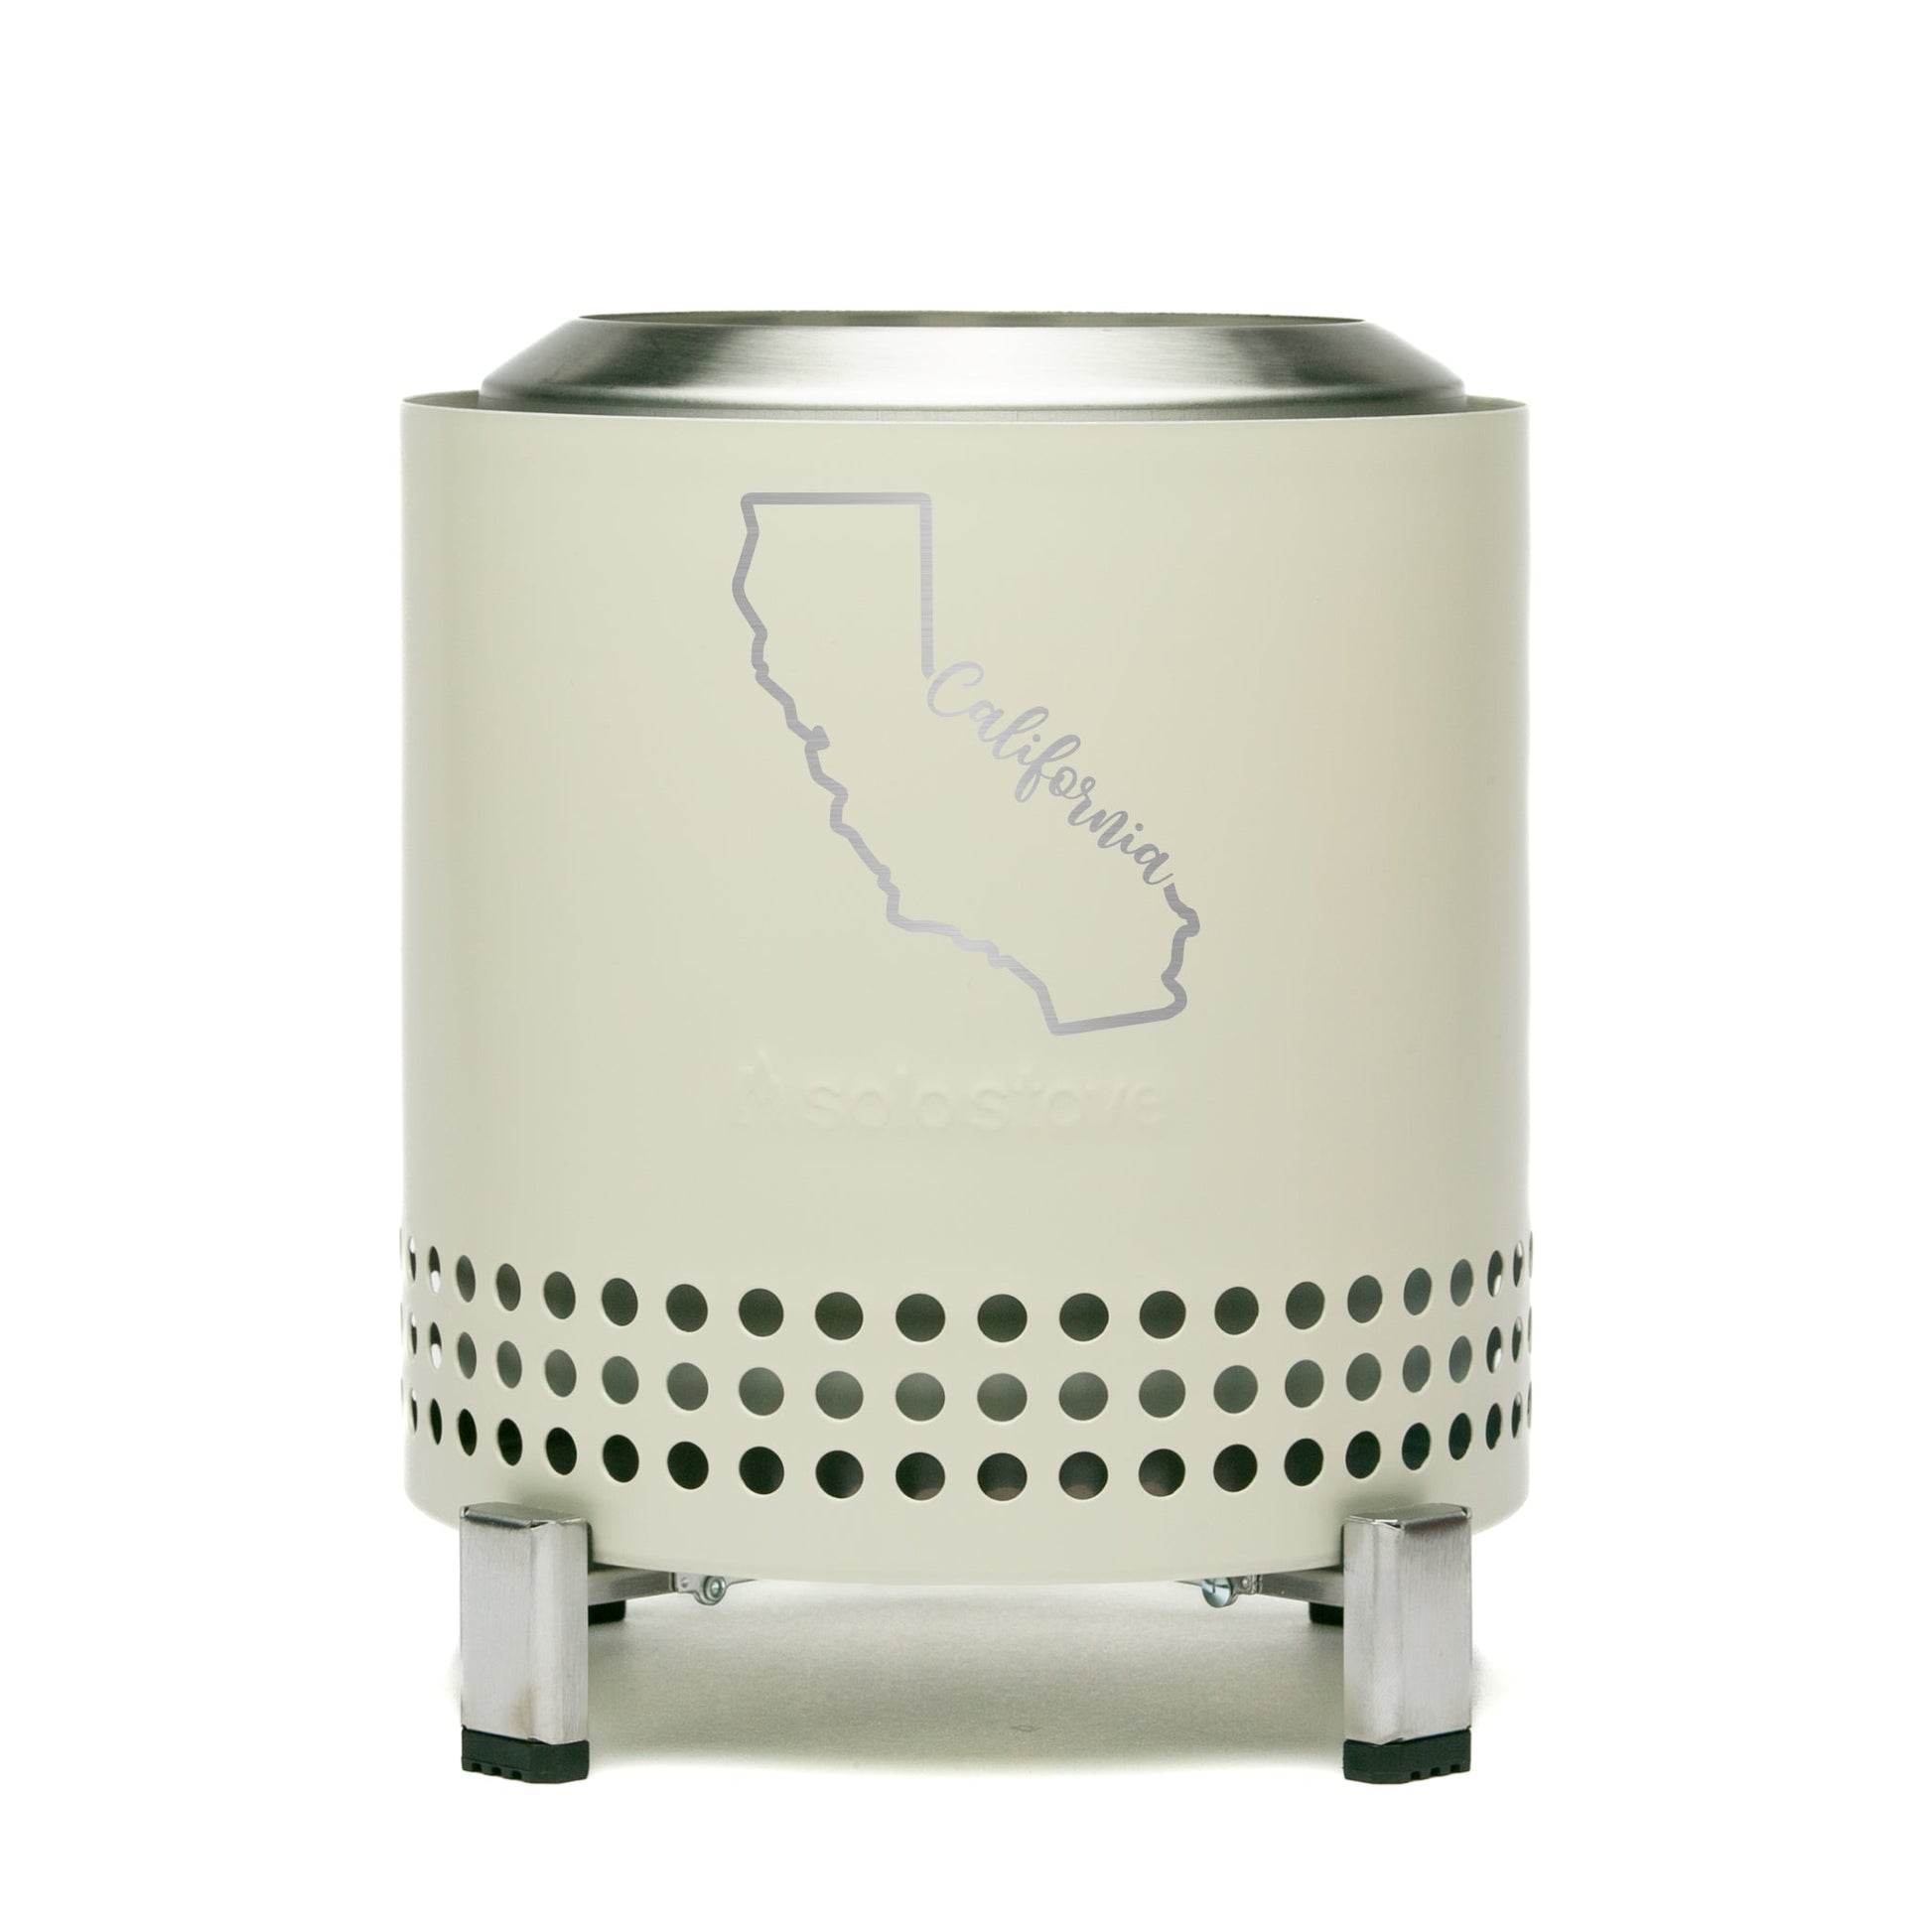 Personalized solo stove® Mesa XL - Etchified-solo stove®-ETC-ST-MESAXL-SSMESAXL-BONE-Swaasi-Laser-Primary